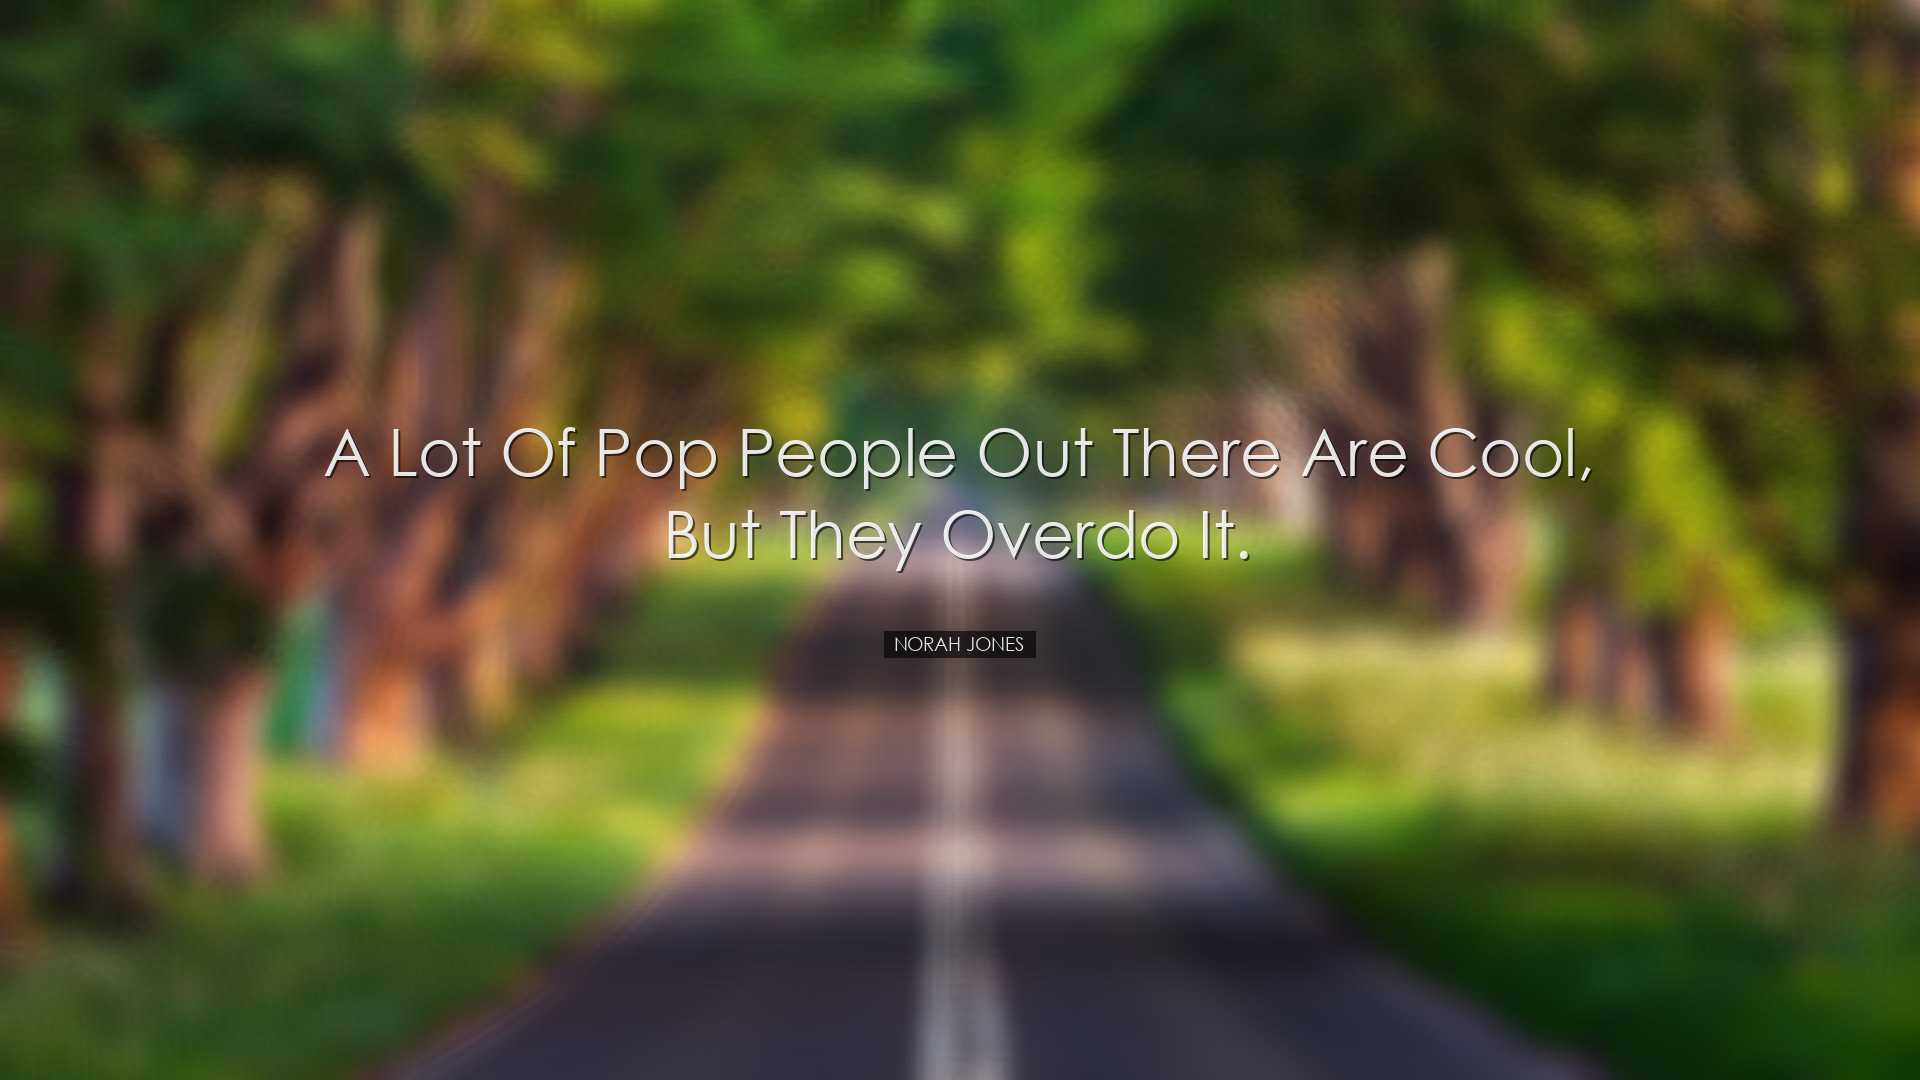 A lot of pop people out there are cool, but they overdo it. - Nora